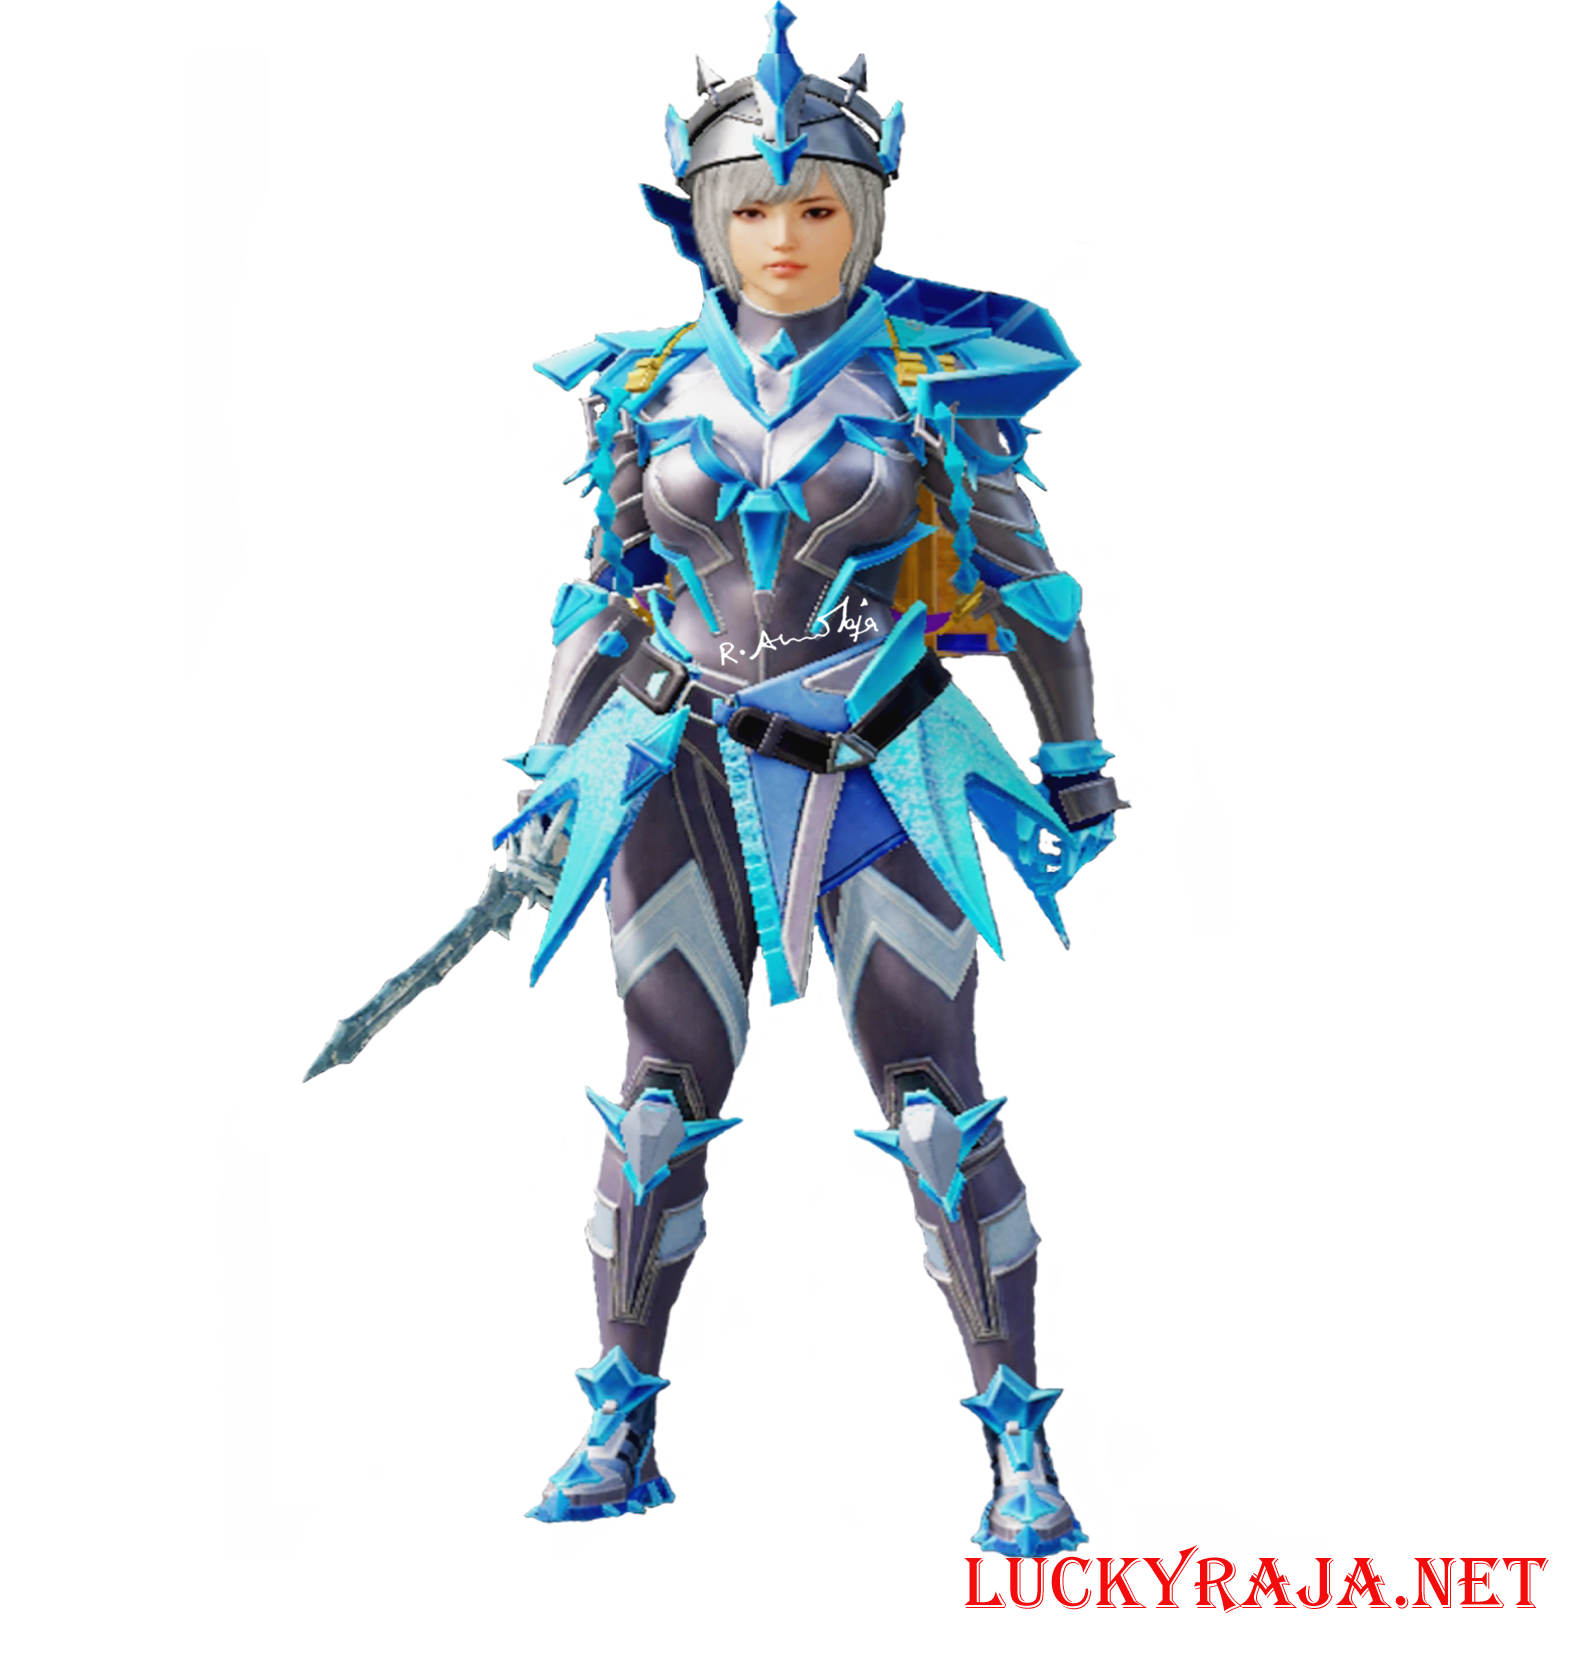 Frost Order,Frost Order images,Frost Order outfits